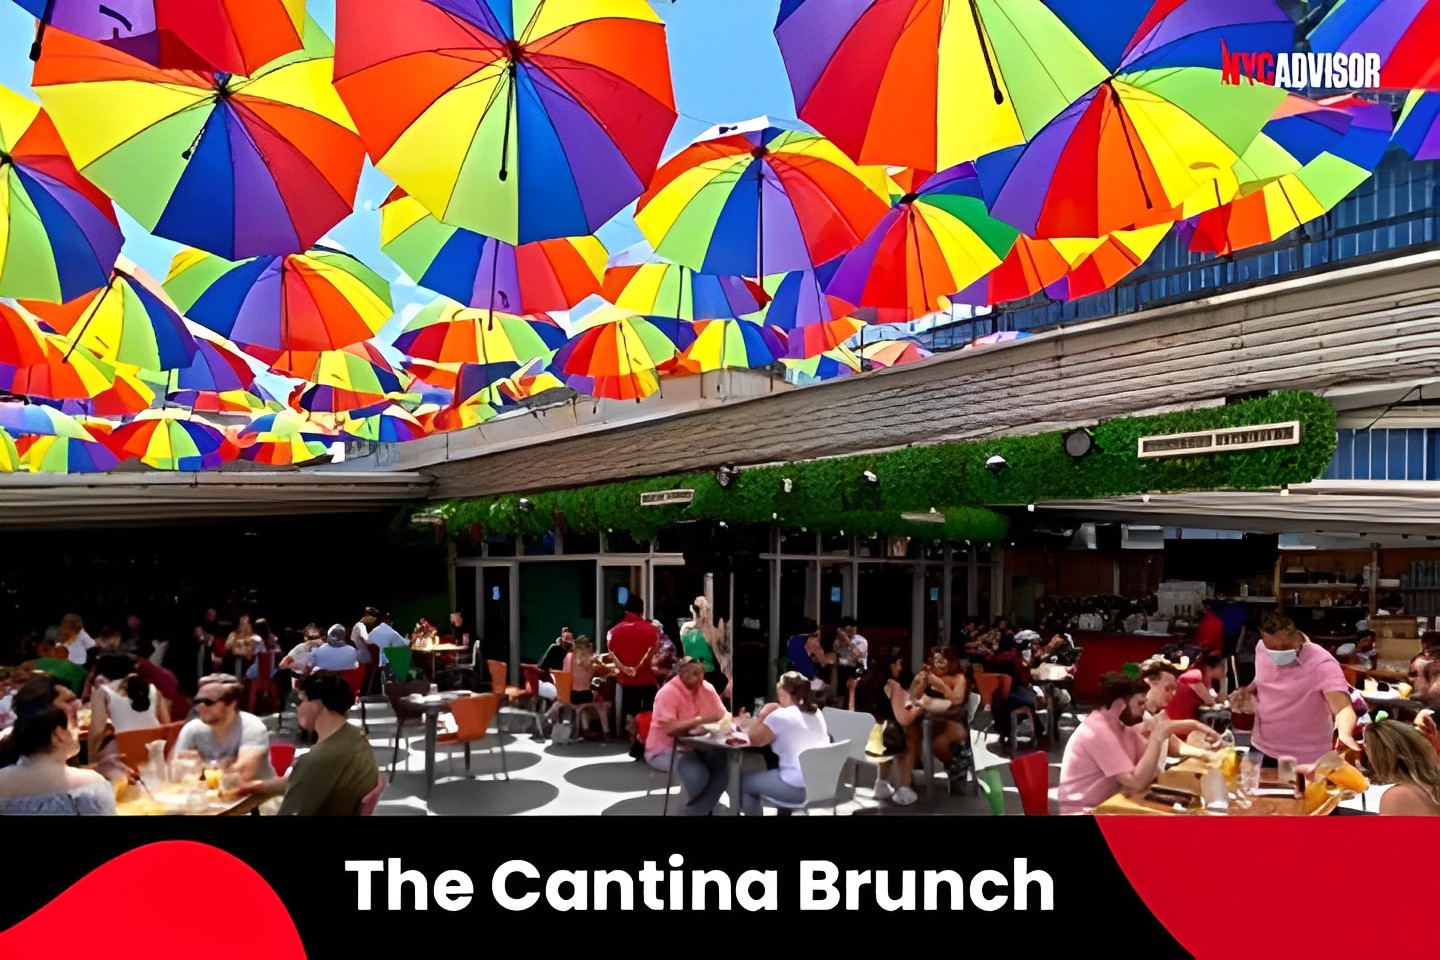 The Cantina Brunch in NYC